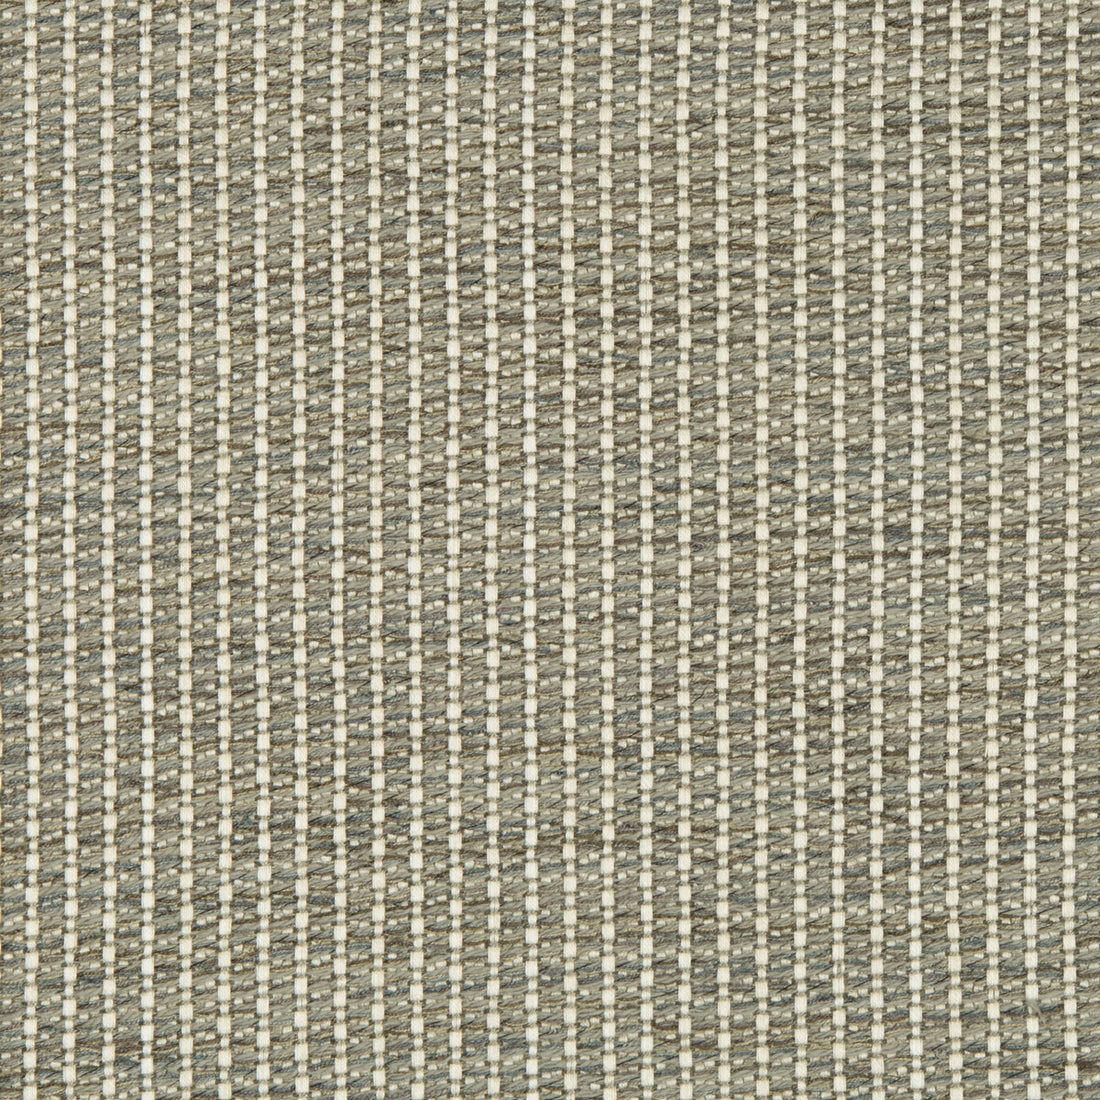 Kravet Design fabric in 35123-21 color - pattern 35123.21.0 - by Kravet Design in the Performance Crypton Home collection